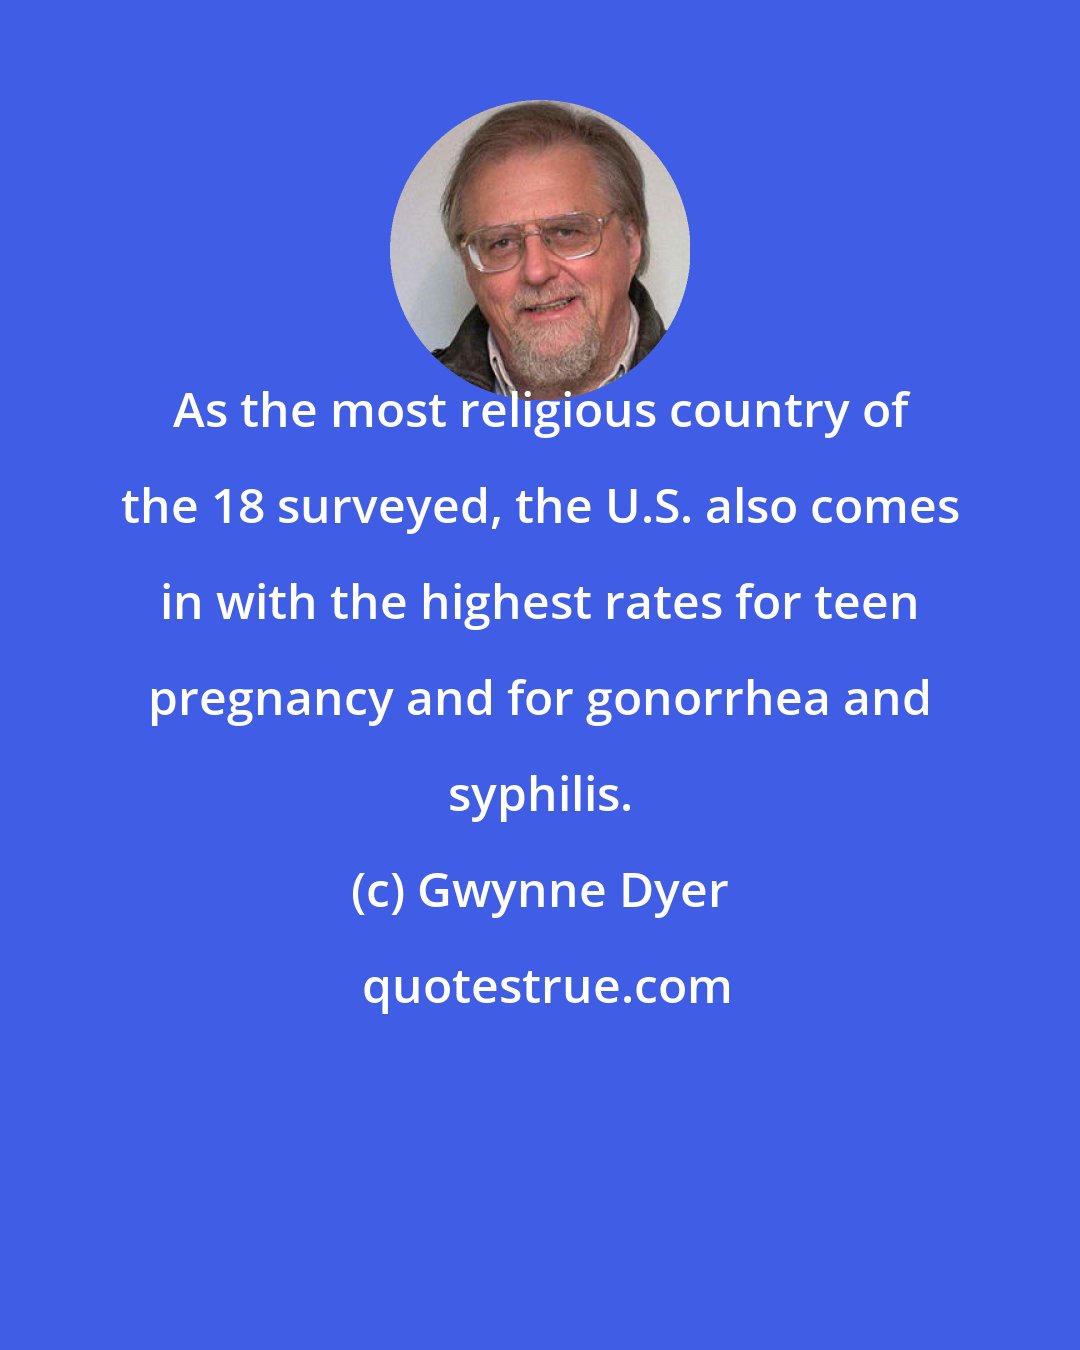 Gwynne Dyer: As the most religious country of the 18 surveyed, the U.S. also comes in with the highest rates for teen pregnancy and for gonorrhea and syphilis.